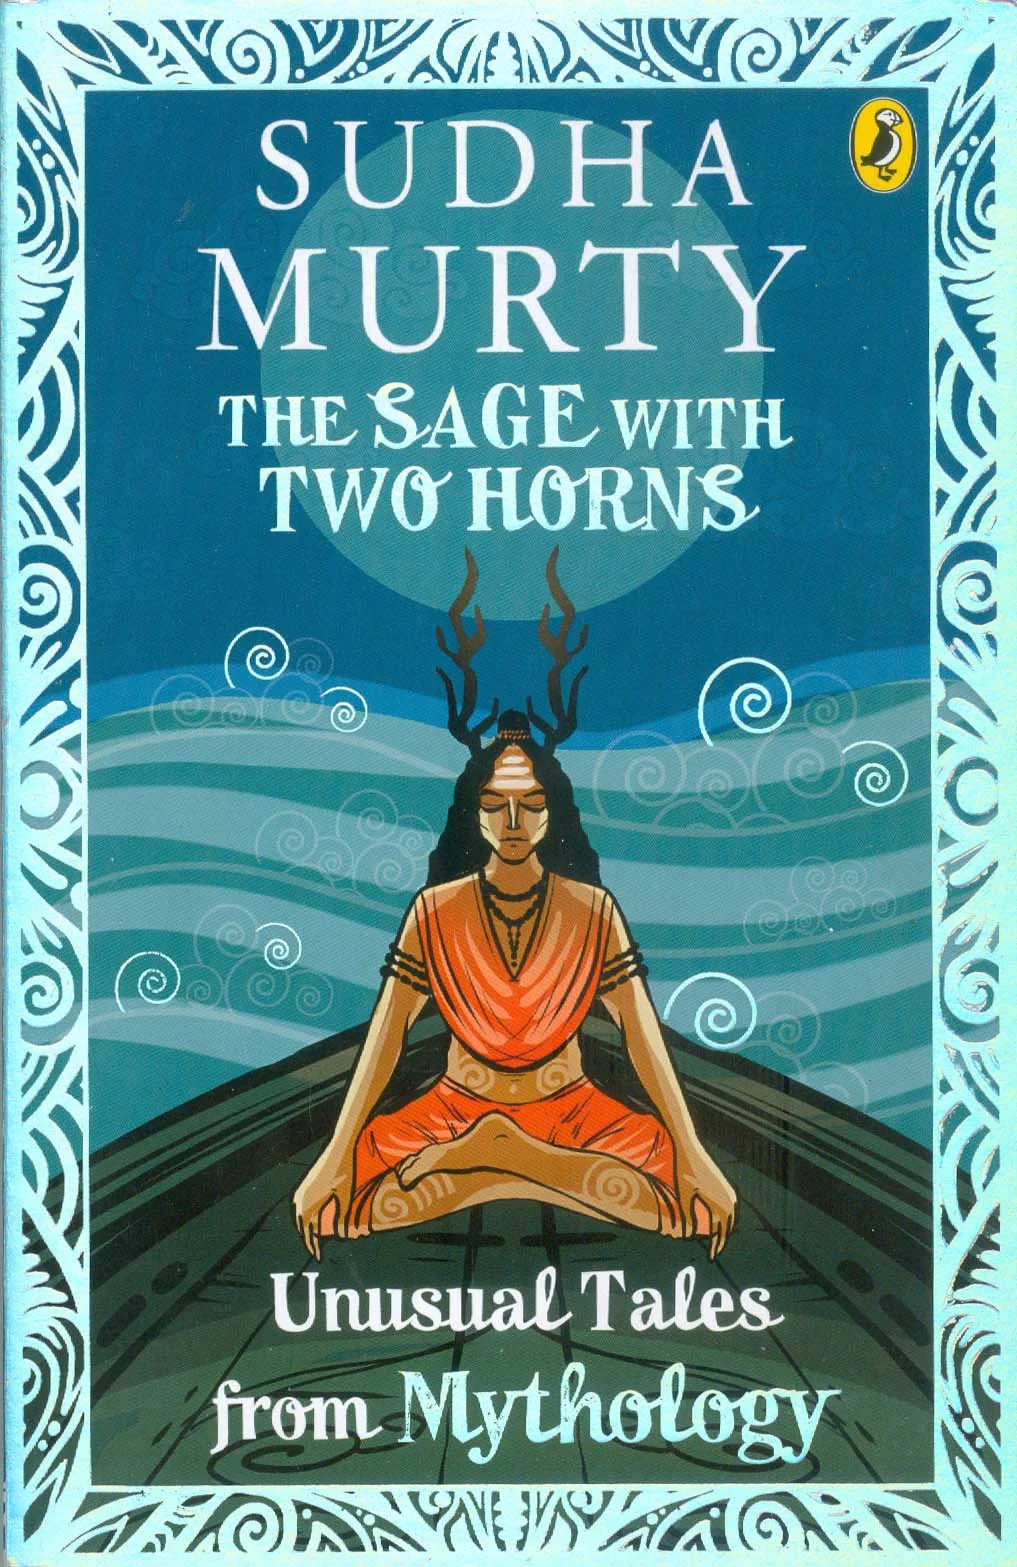 Book Title – THE SAGE WITH TWO HORNS